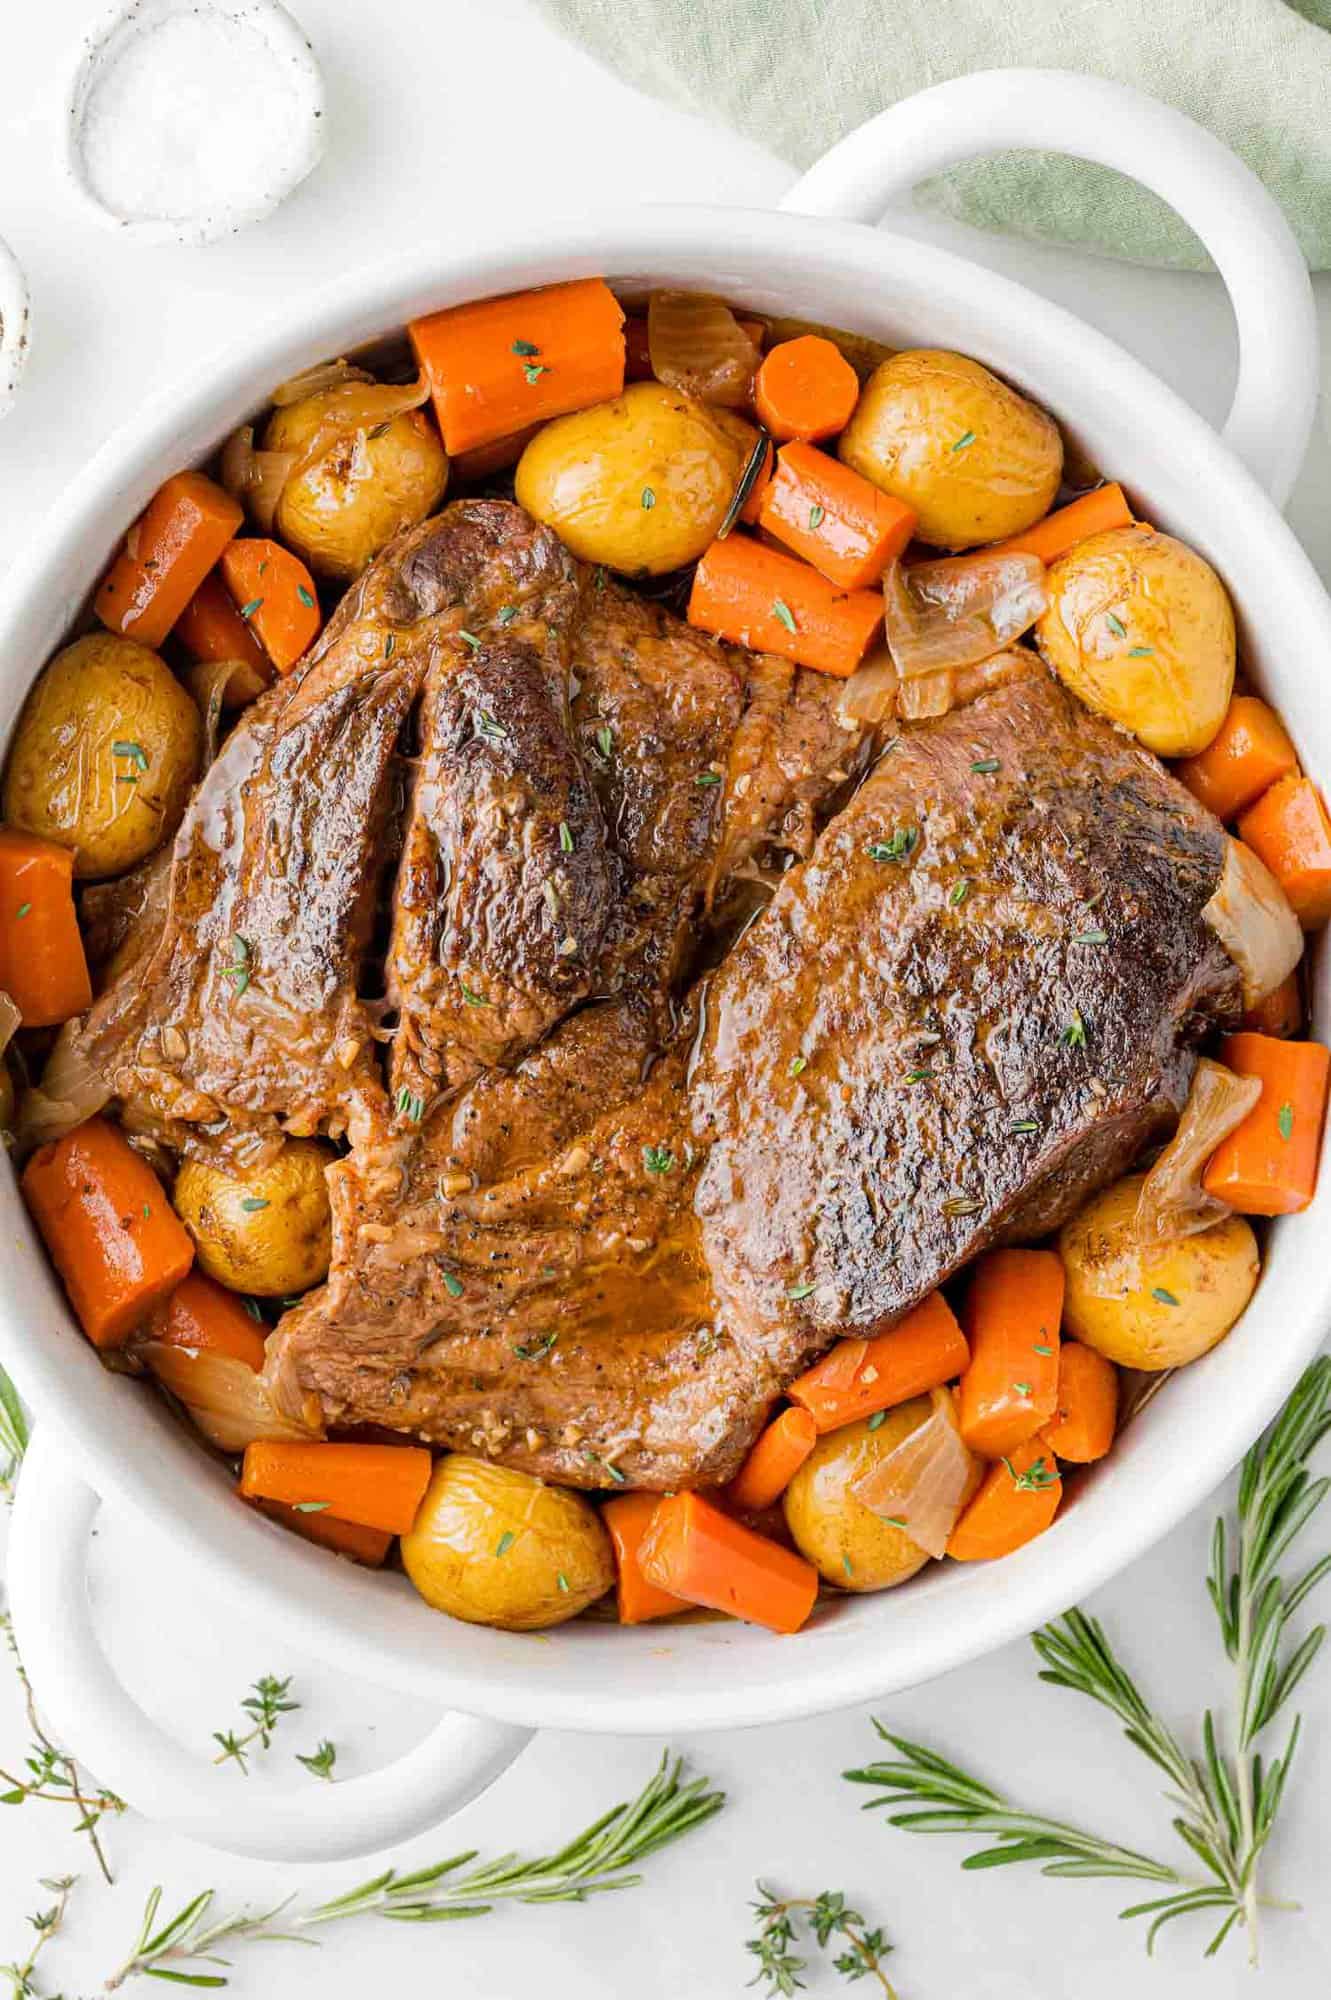 Cooked pot roast in a white pan with potatoes and carrots.